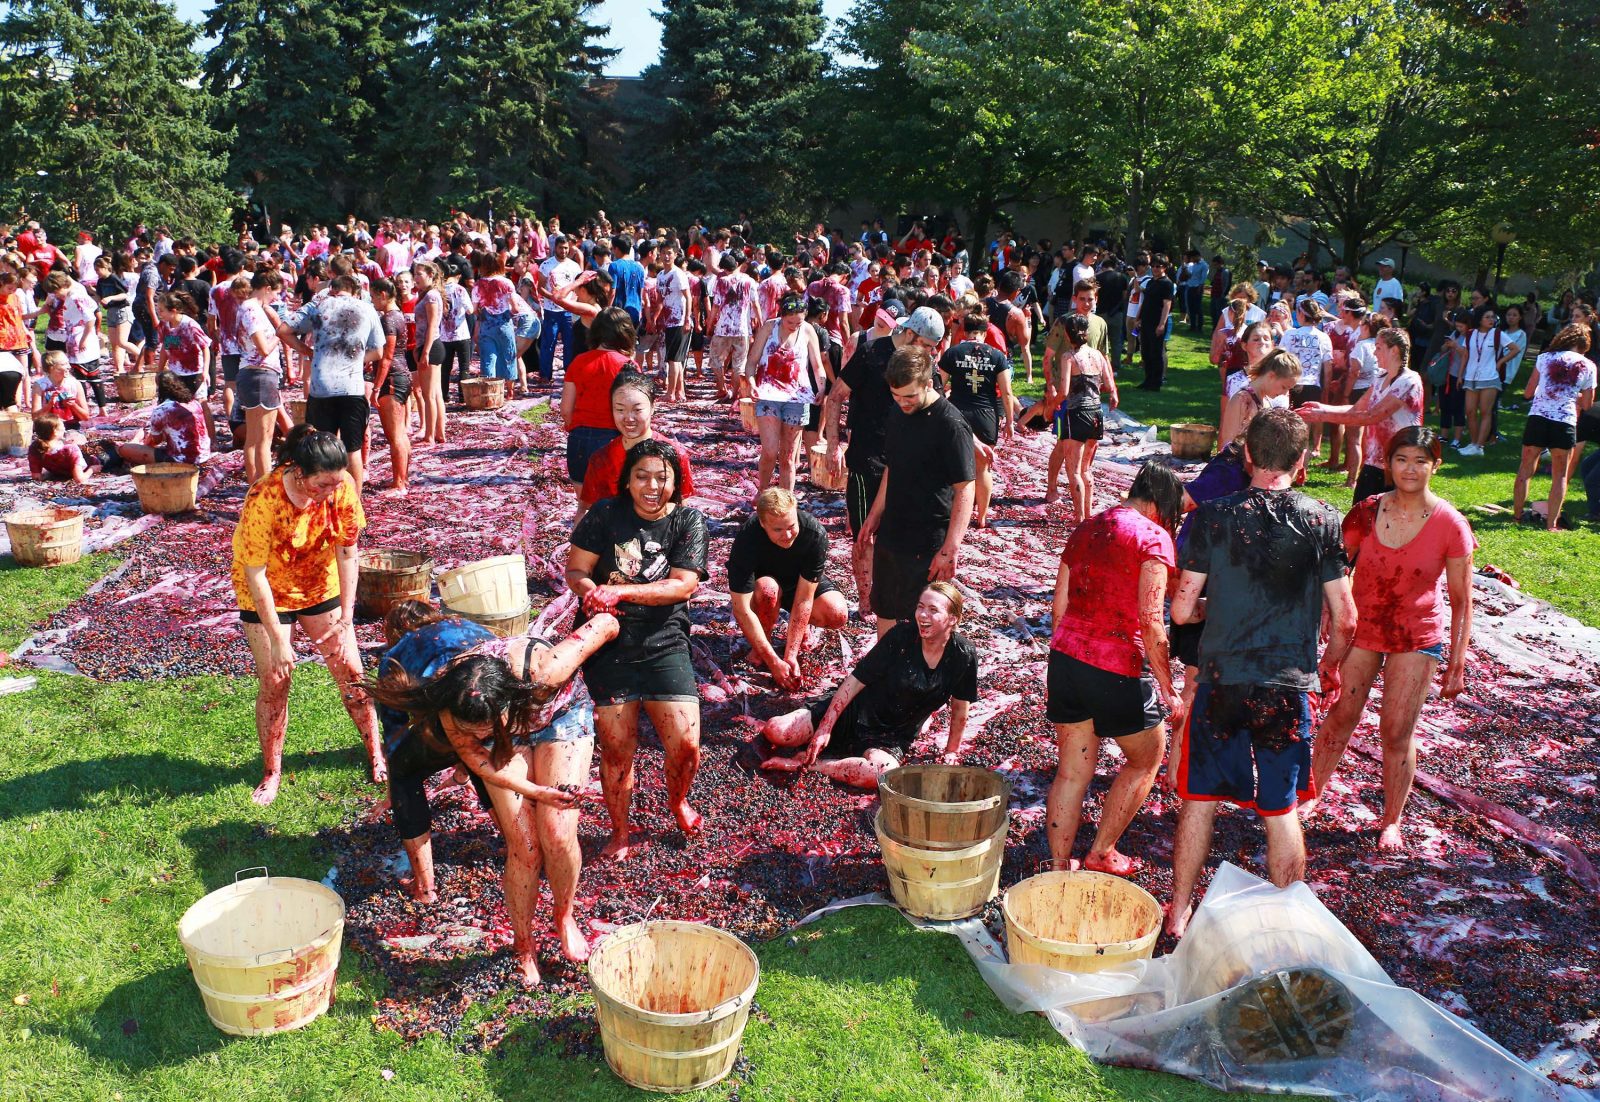 Hundreds of students throw grapes at each other on top of plastic tarps in an outdoor setting.